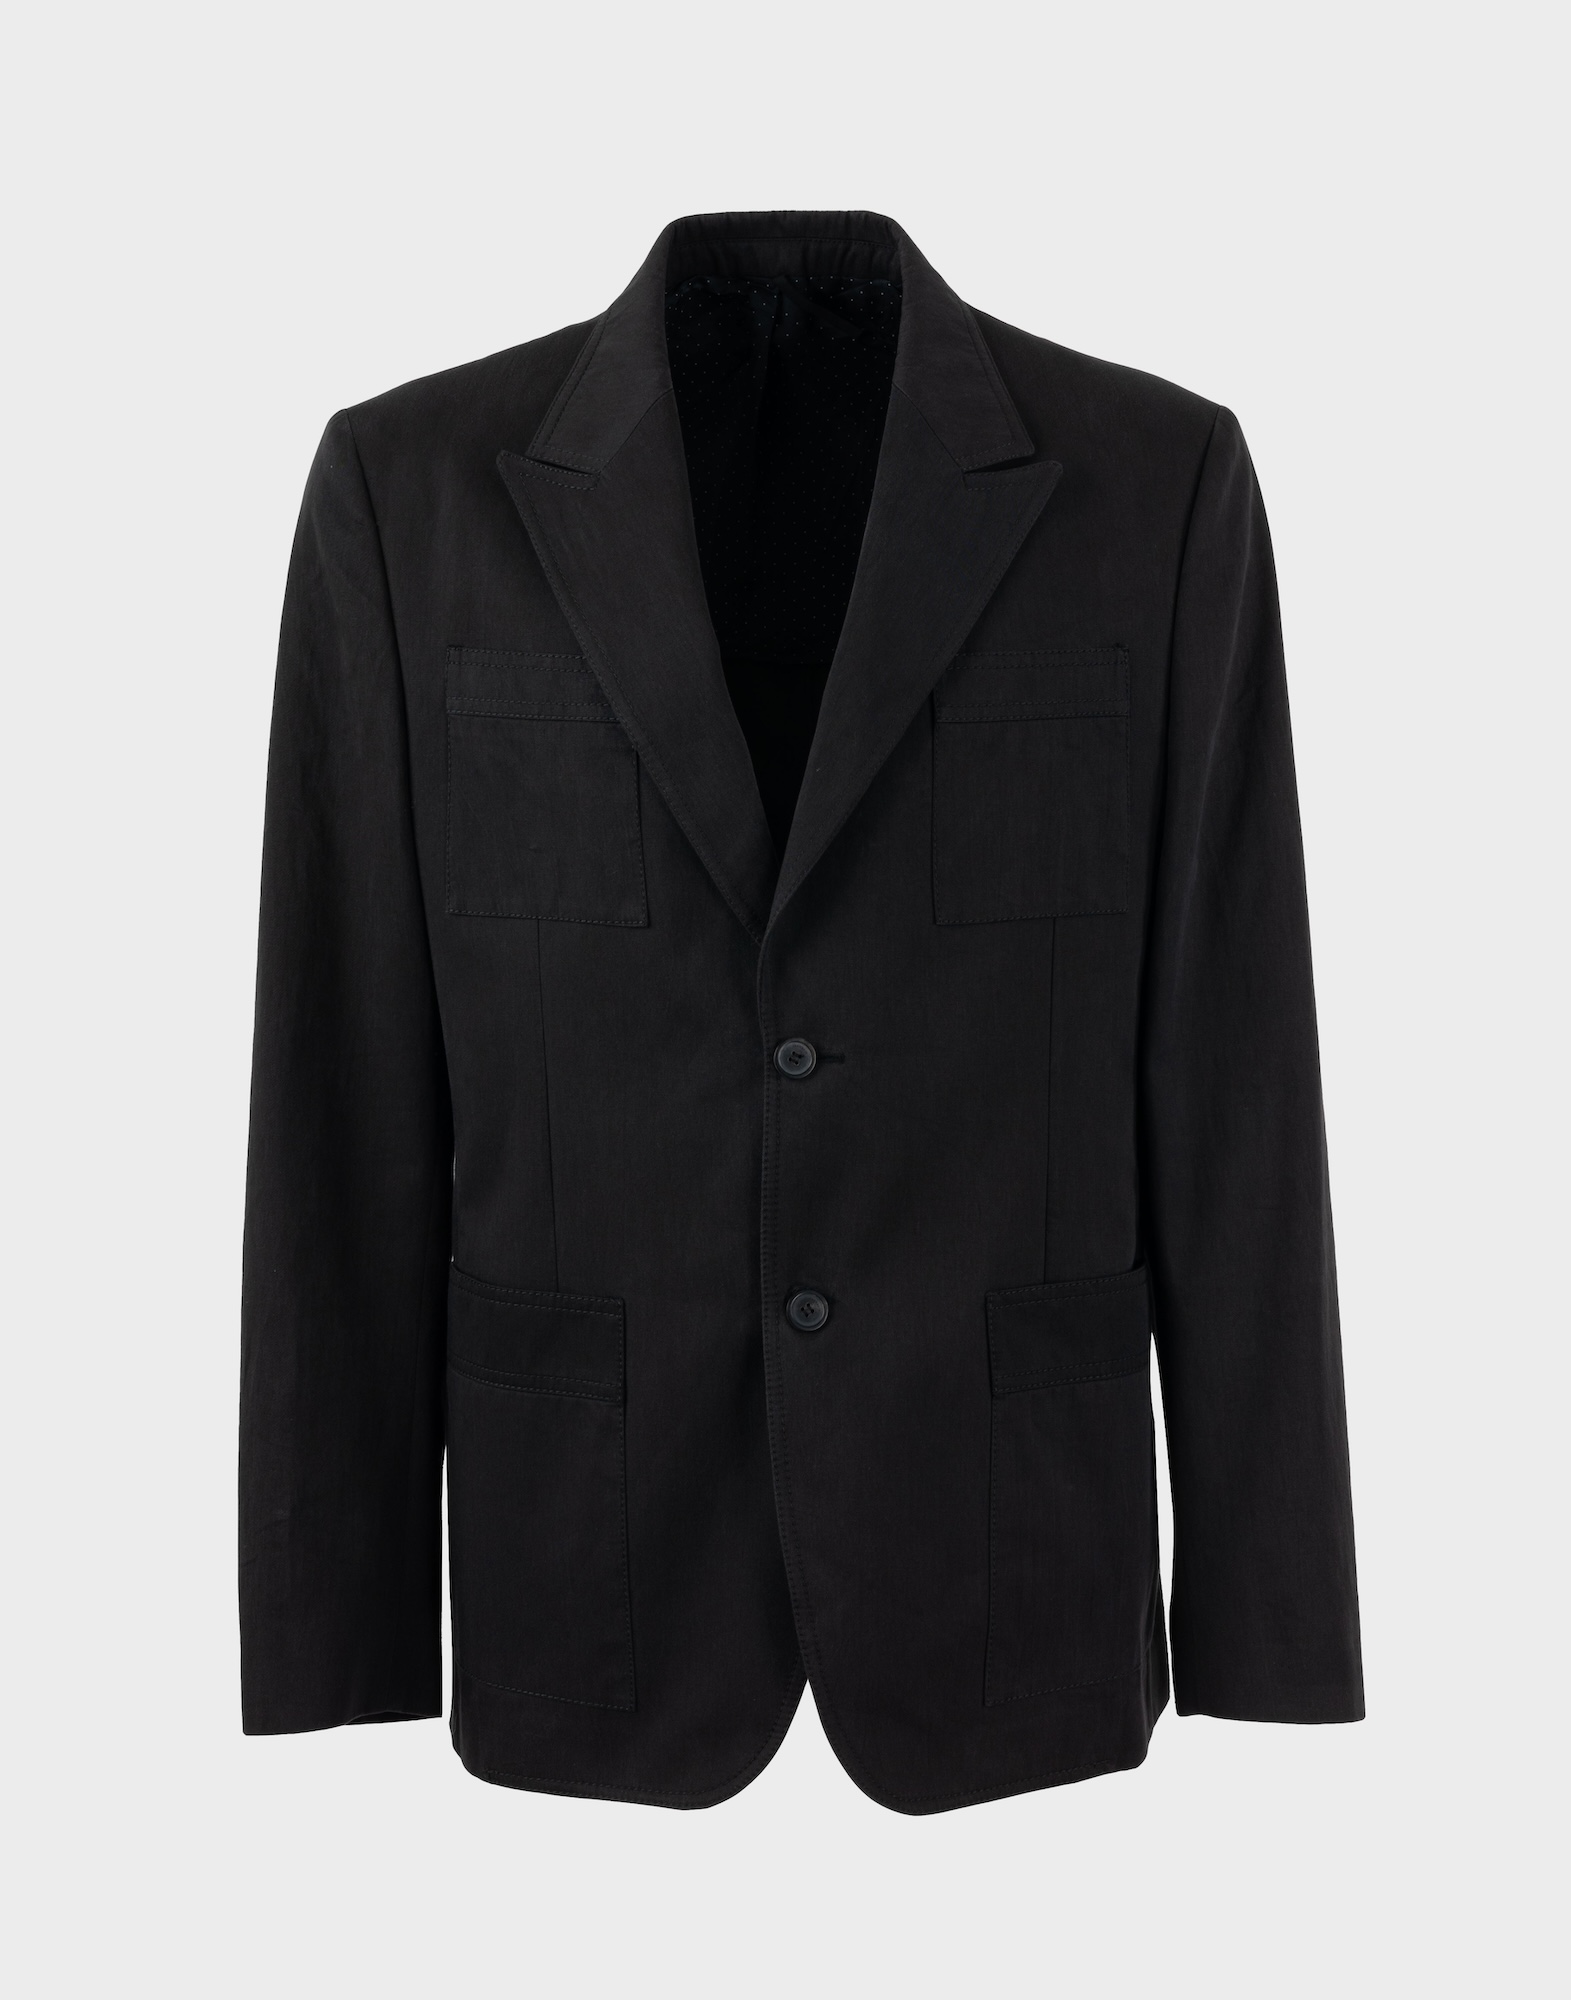 black men's jacket with v-neck, two-button front fastening and four pockets